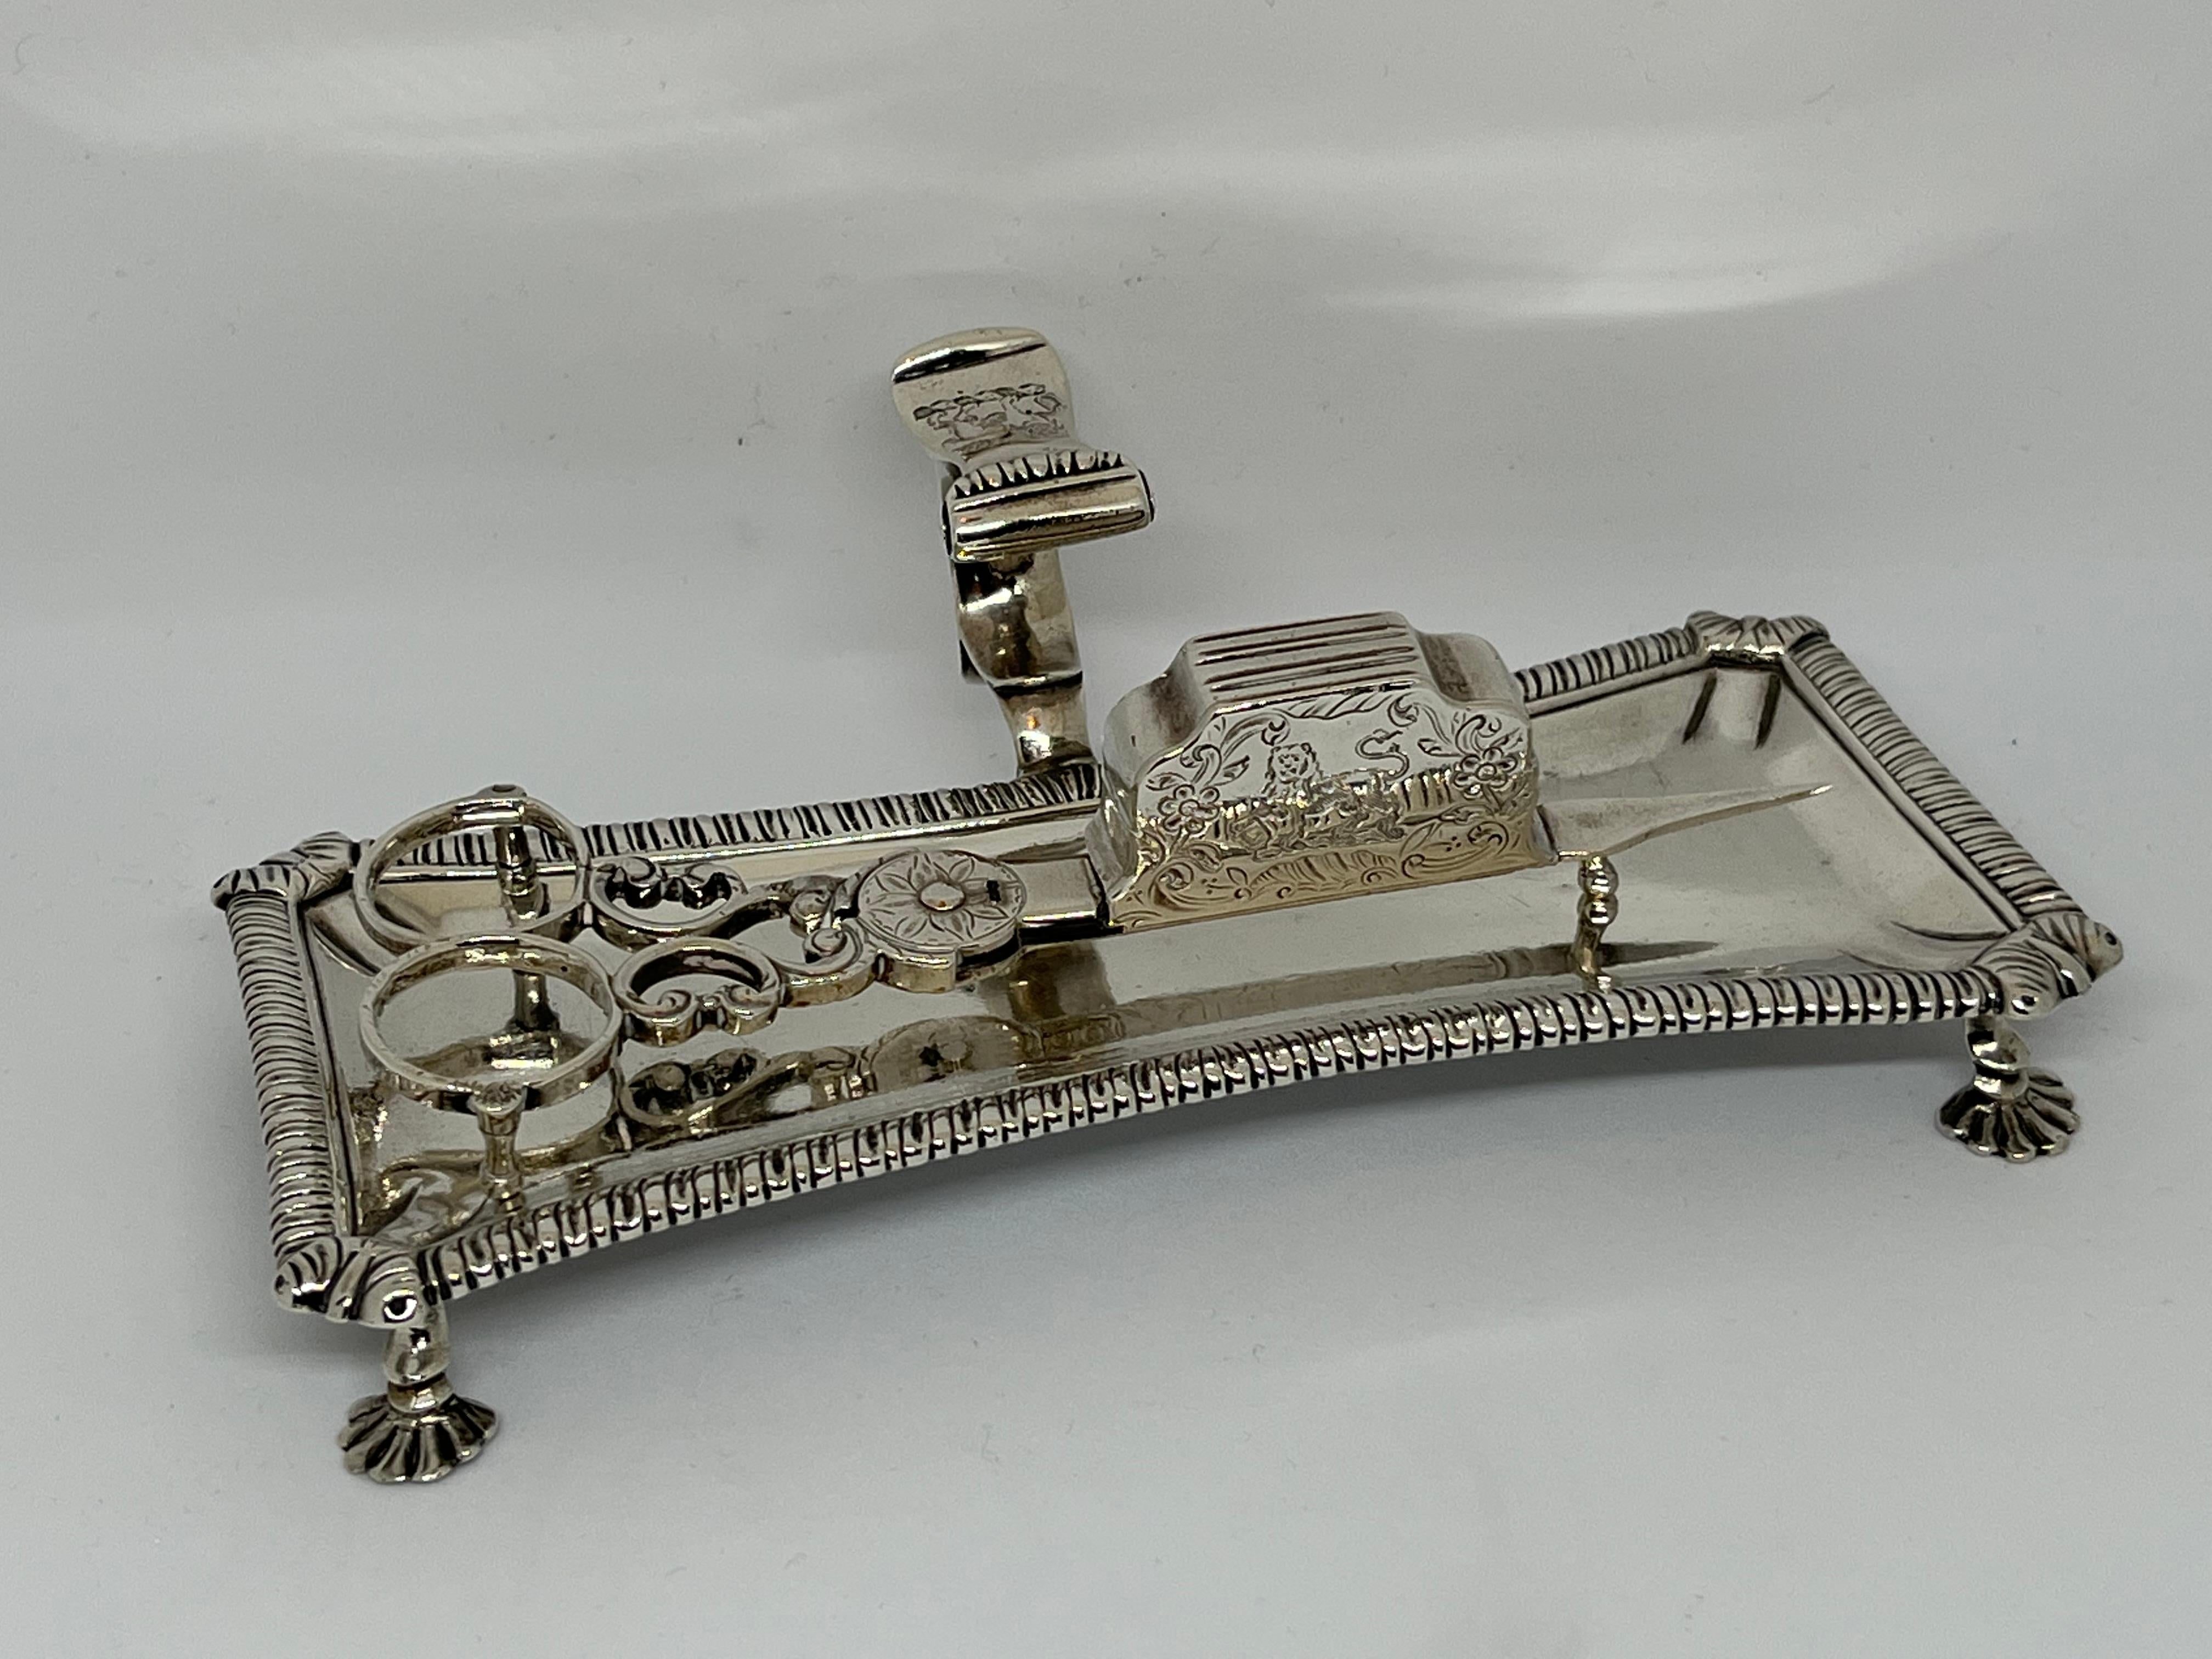 A very rare eighteenth-century silver matching snuffer on stand.

George III silver matching snuffer on original stand, the snuffer tray with gadroon border and acanthus leaf corners, atop four pad feet, the snuffers with scroll cut and chased